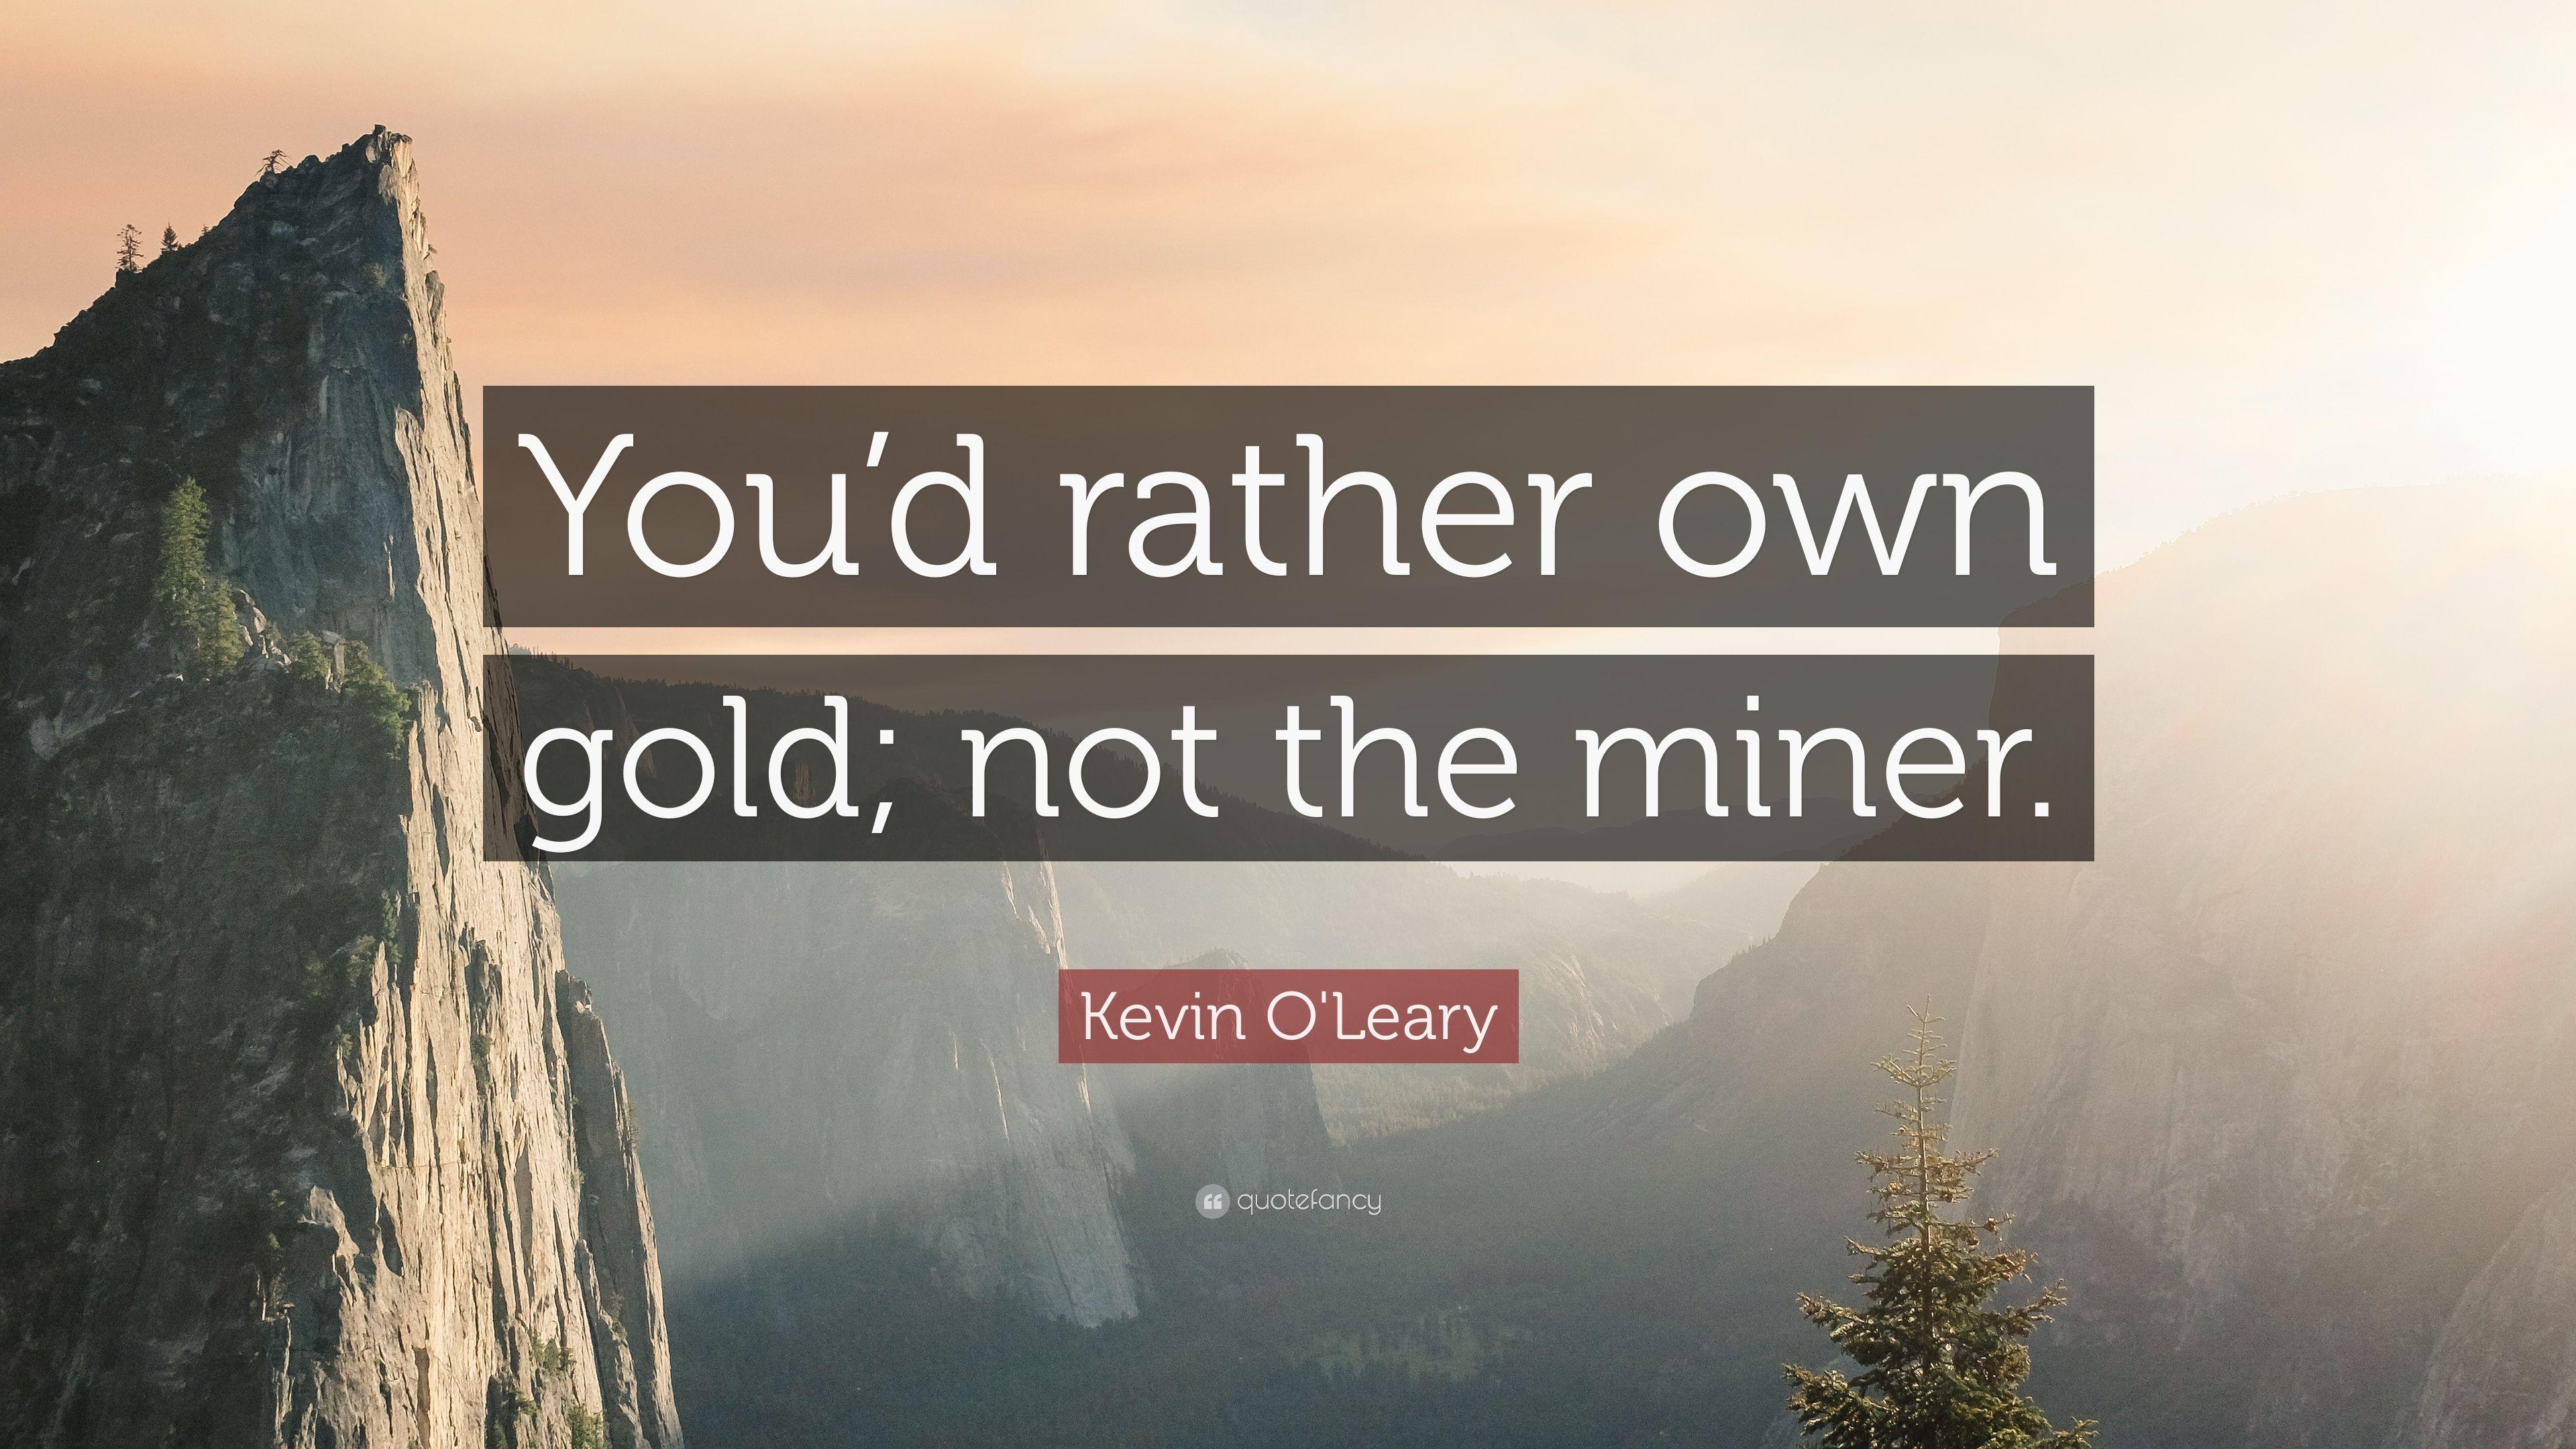 Kevin O'Leary Quote: “You'd rather own gold; not the miner.” 9